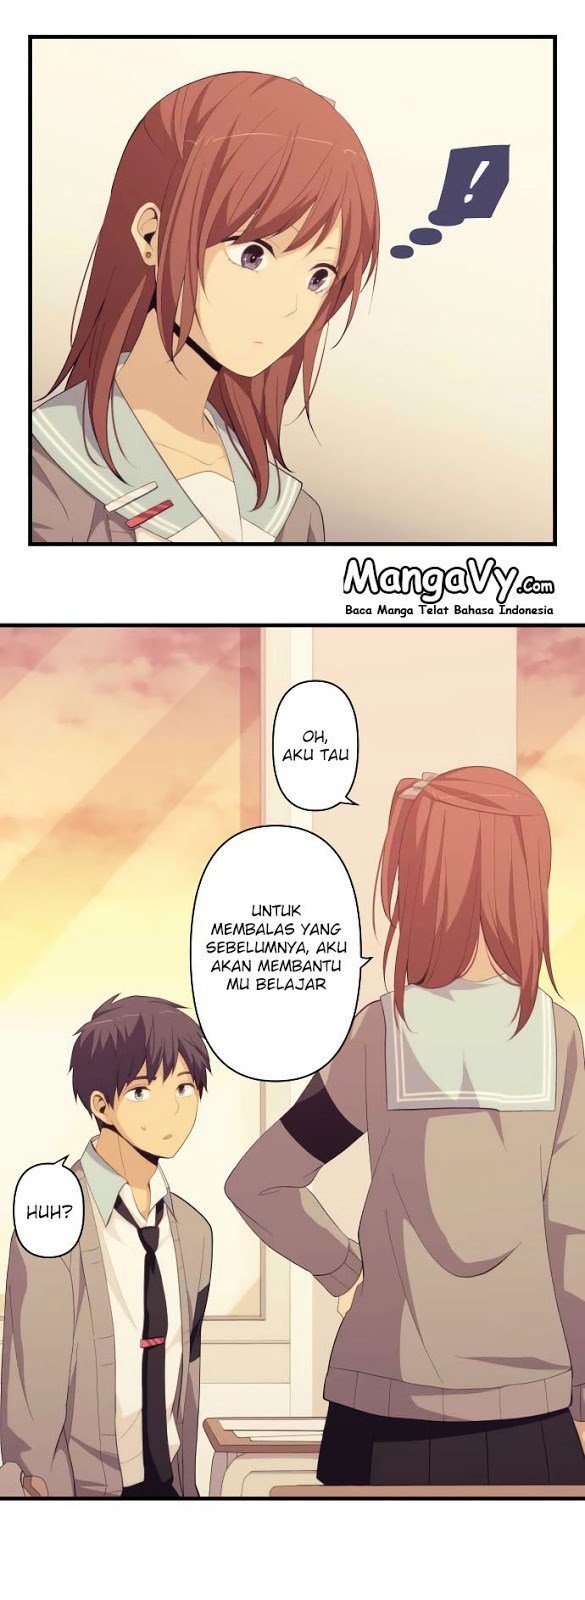 ReLife Chapter 182